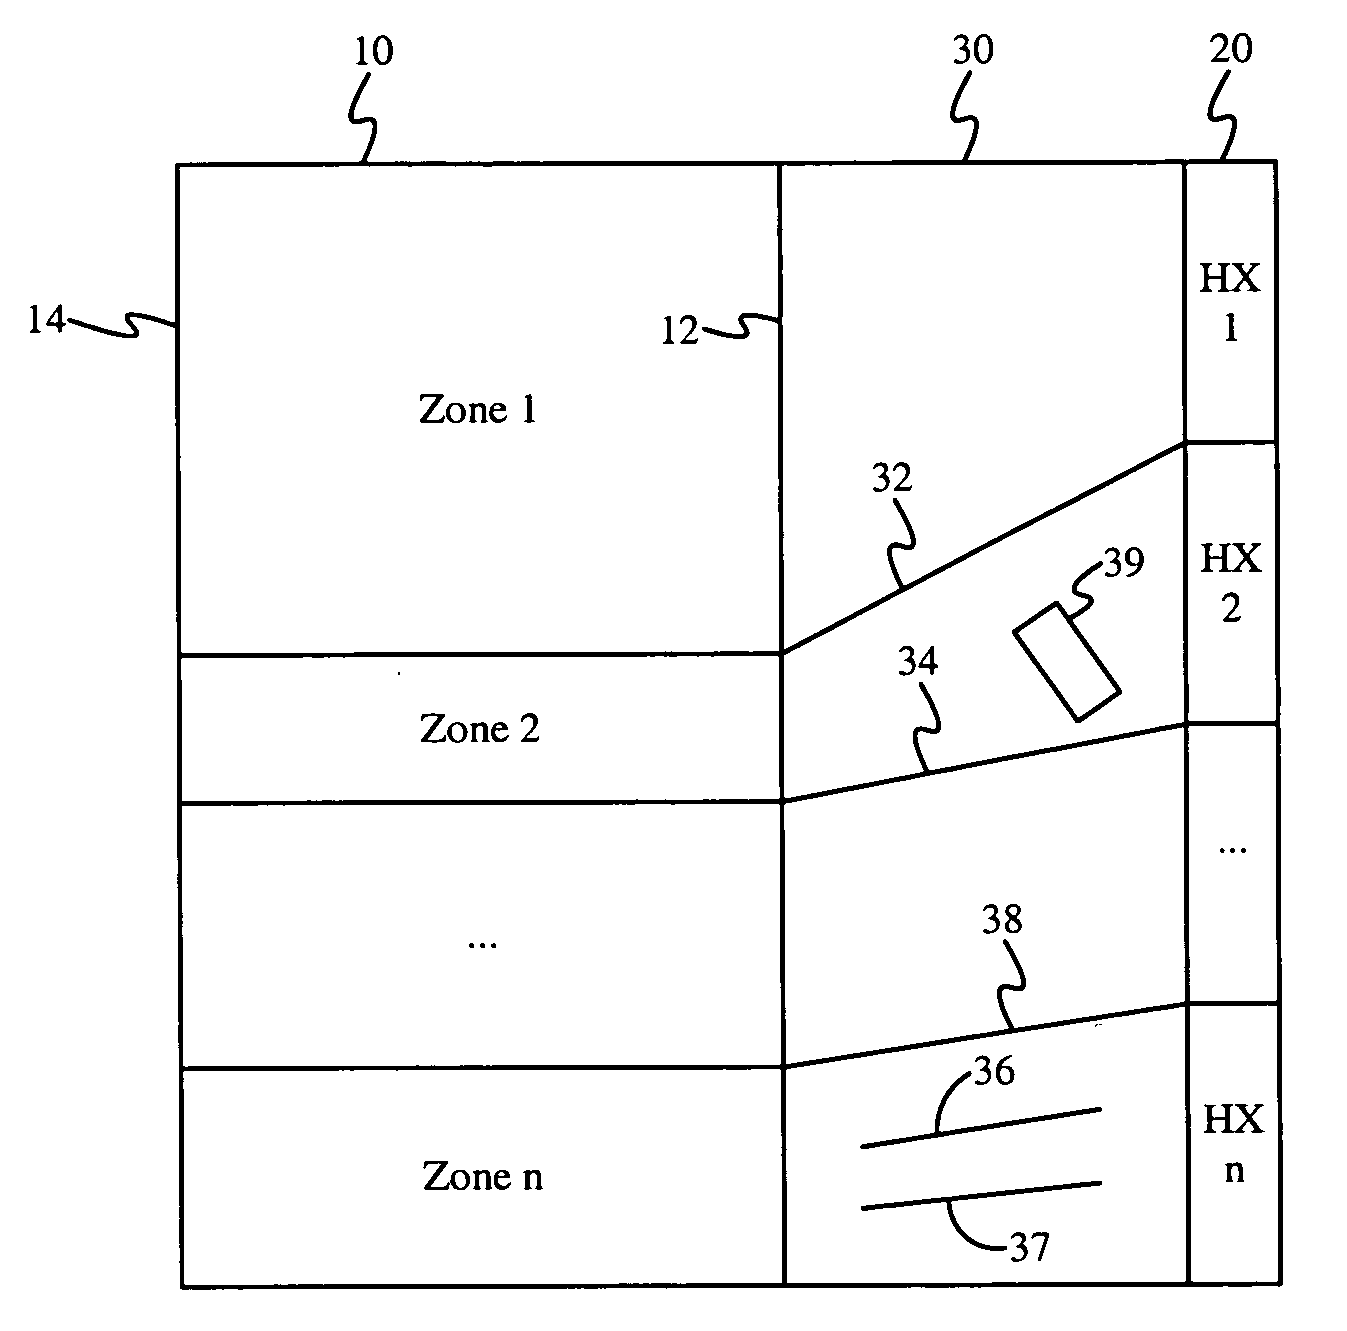 Method and apparatus for providing supplemental cooling to server racks